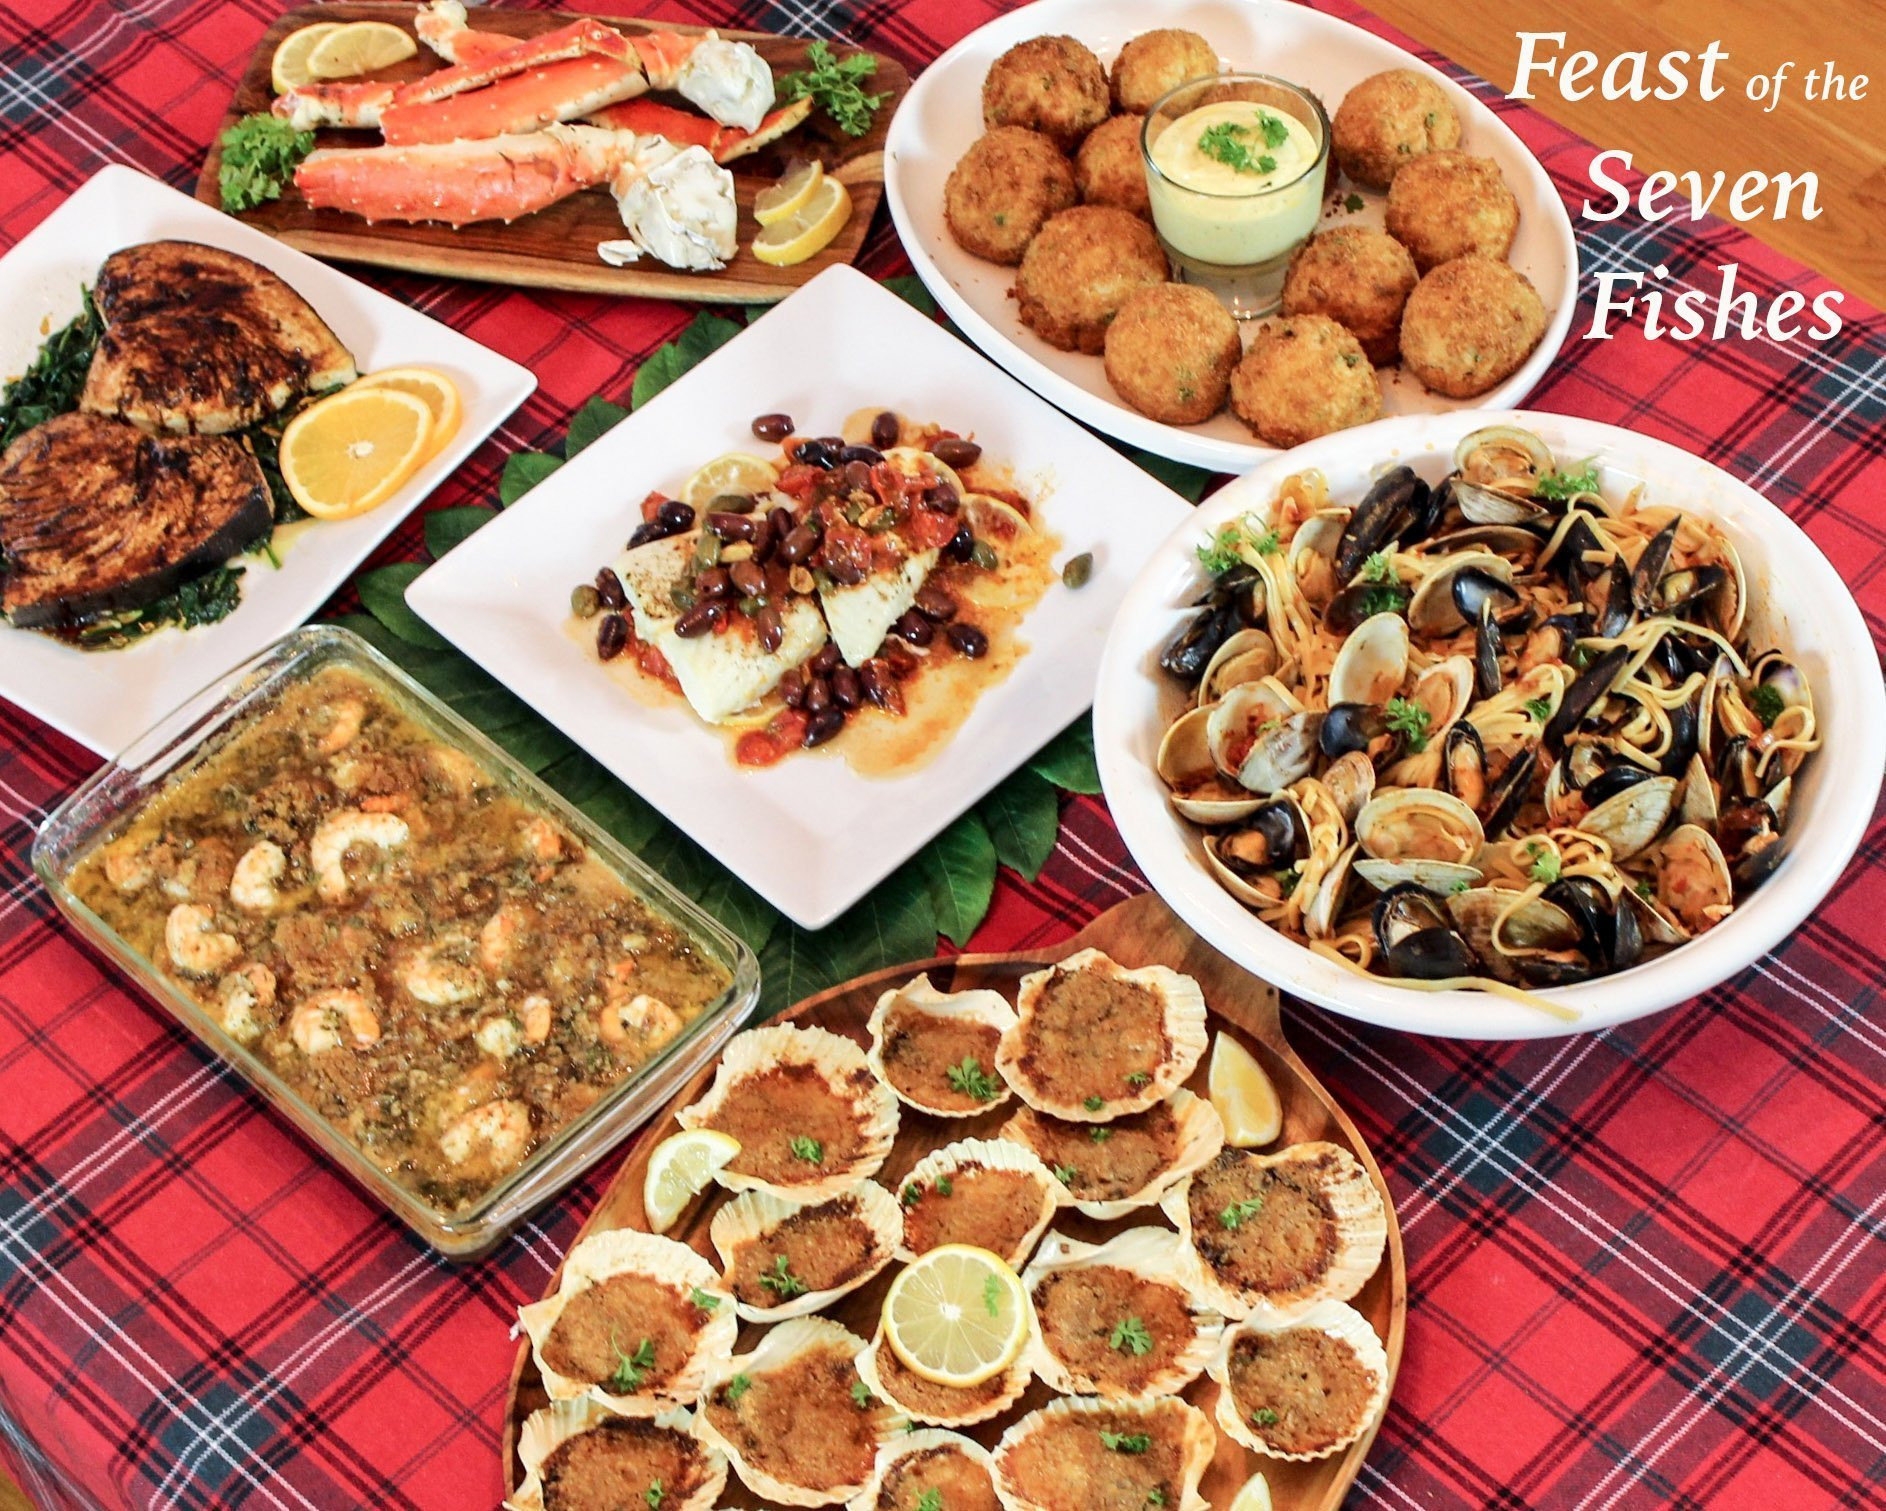 7 Fishes Christmas Eve Italian Recipes
 Feast of the Seven Fishes A Sicilian Christmas Eve Dinner